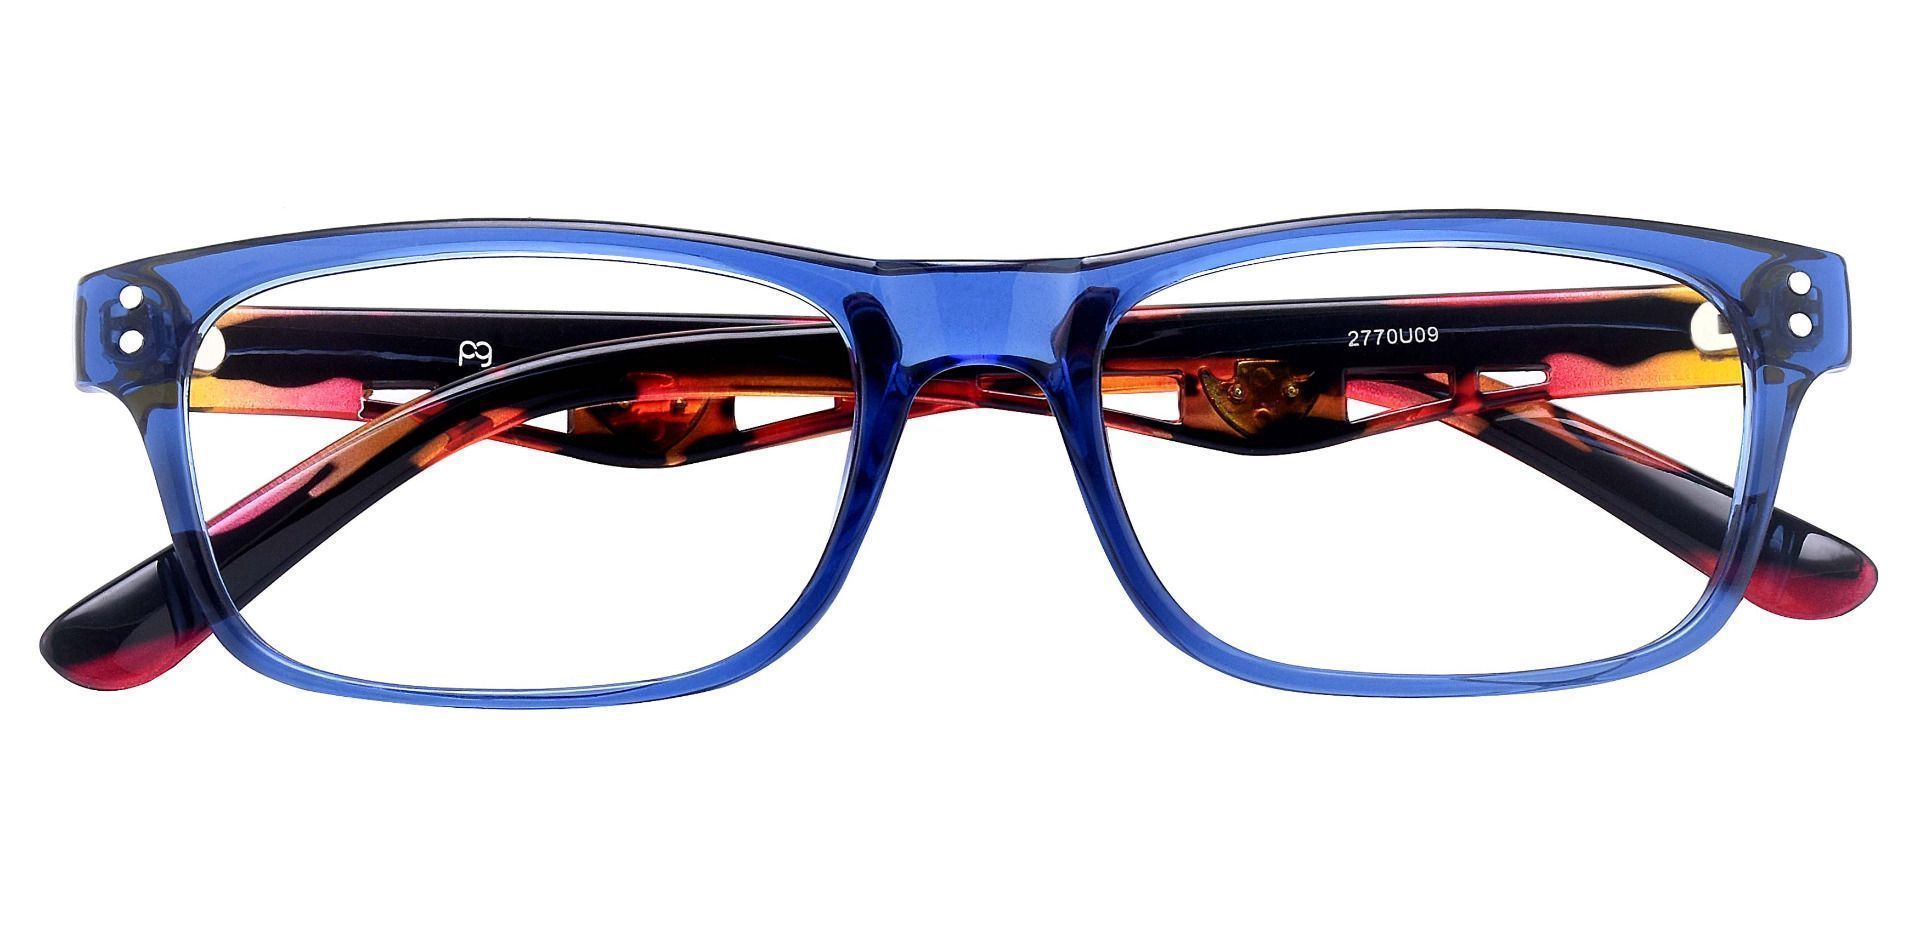 Aura Rectangle Reading Glasses - The Frame Id Blue And Floral